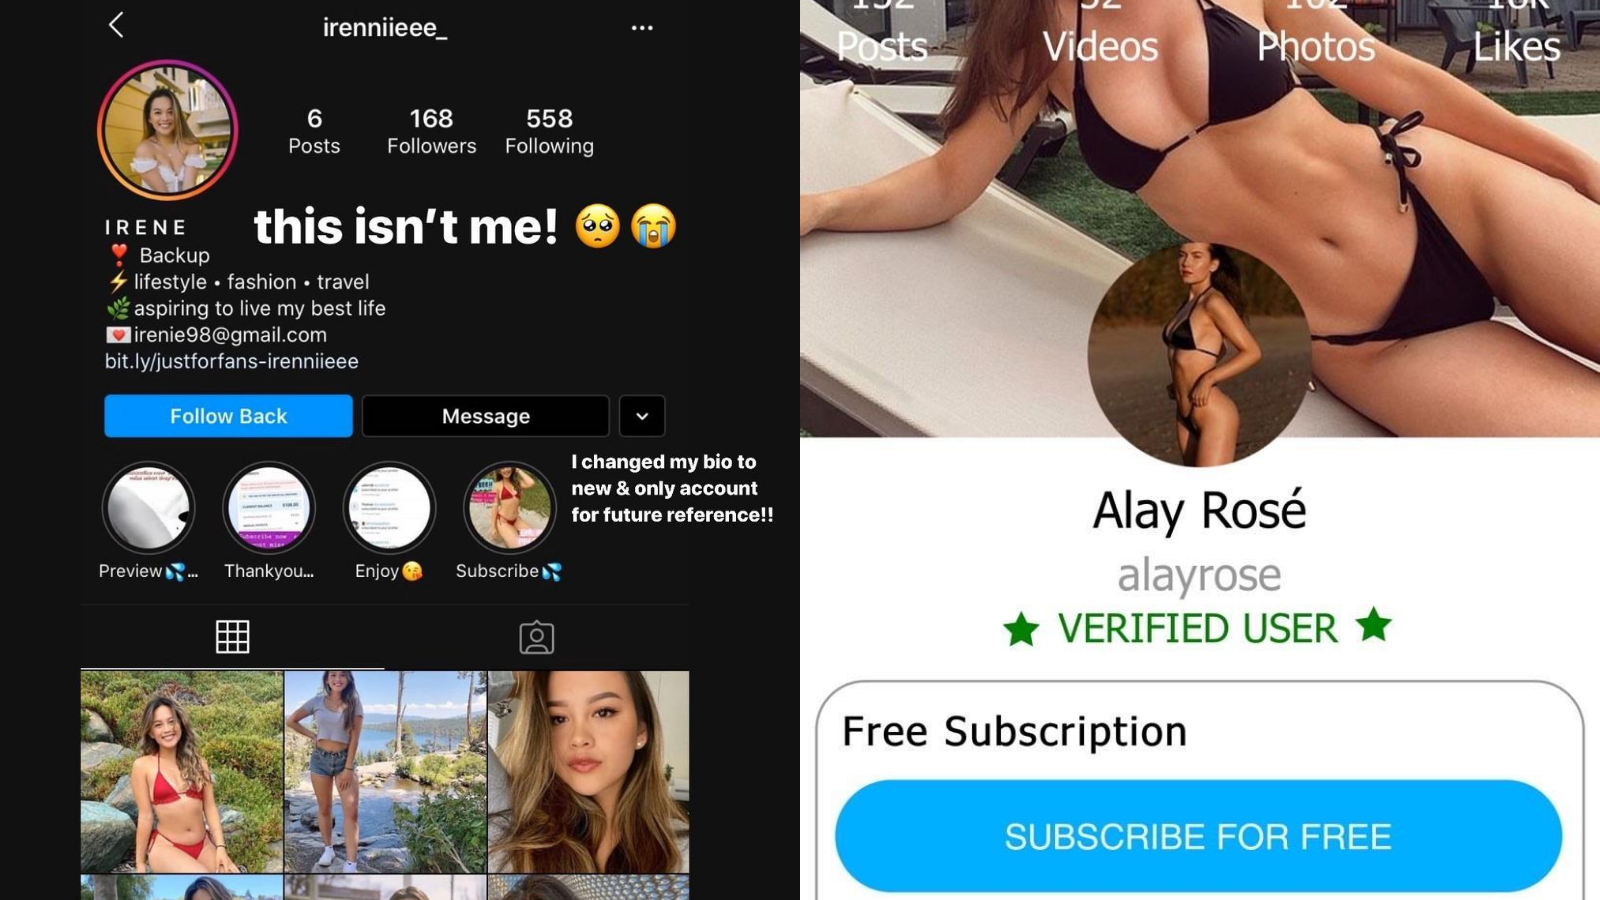 Young Peoples Instagram Profiles Are Being Used for Fake Porn Accounts